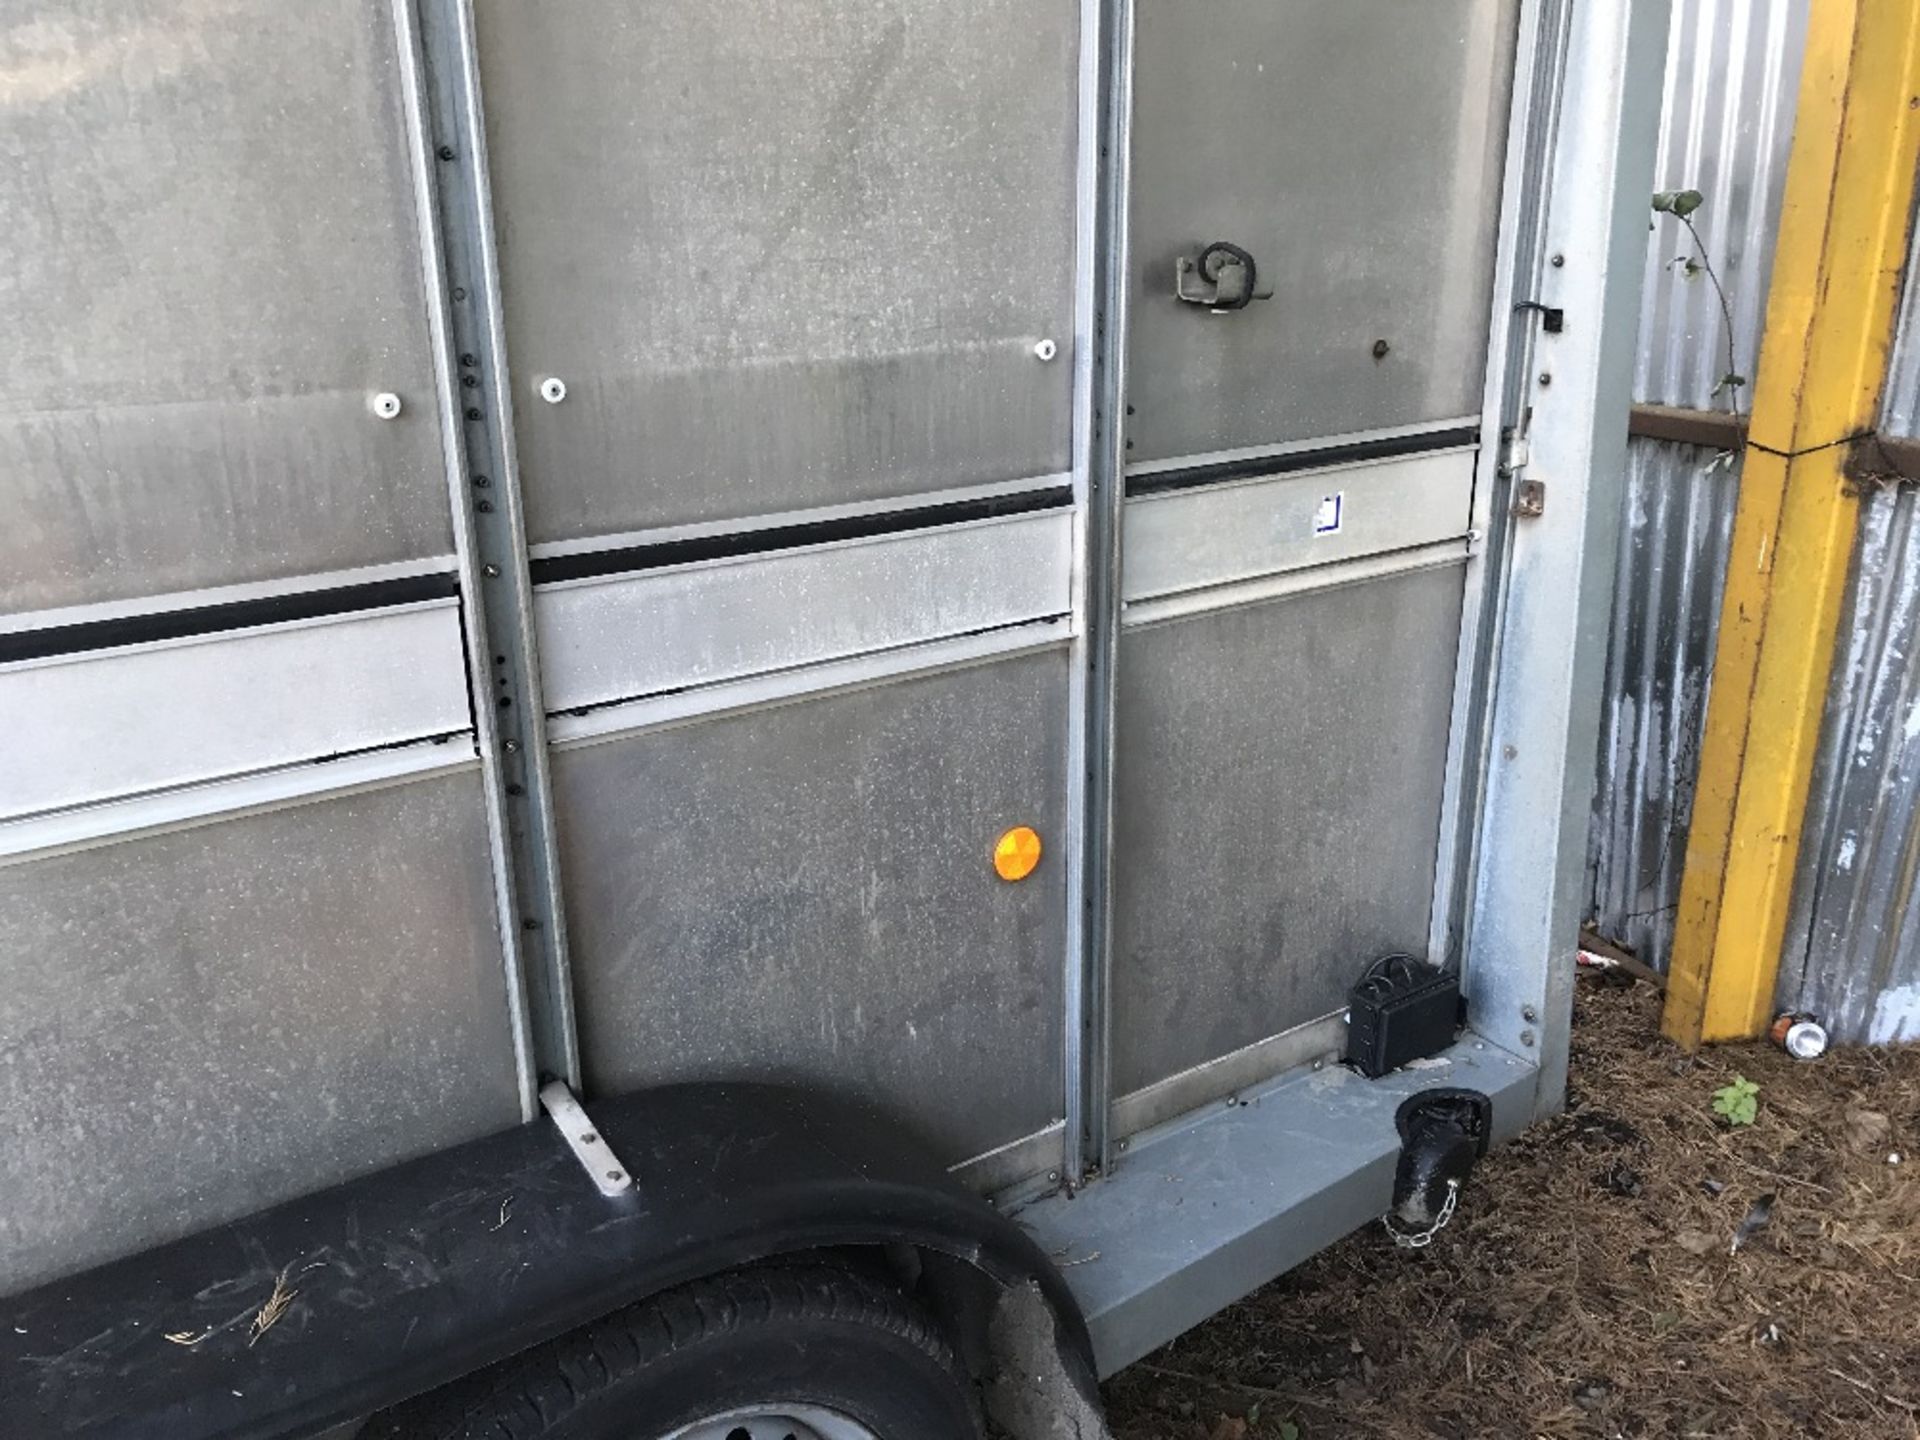 Ifor Williams triaxled livestock trailer with sheep decks, yr2012, previously lightly damaged/ - Image 11 of 11